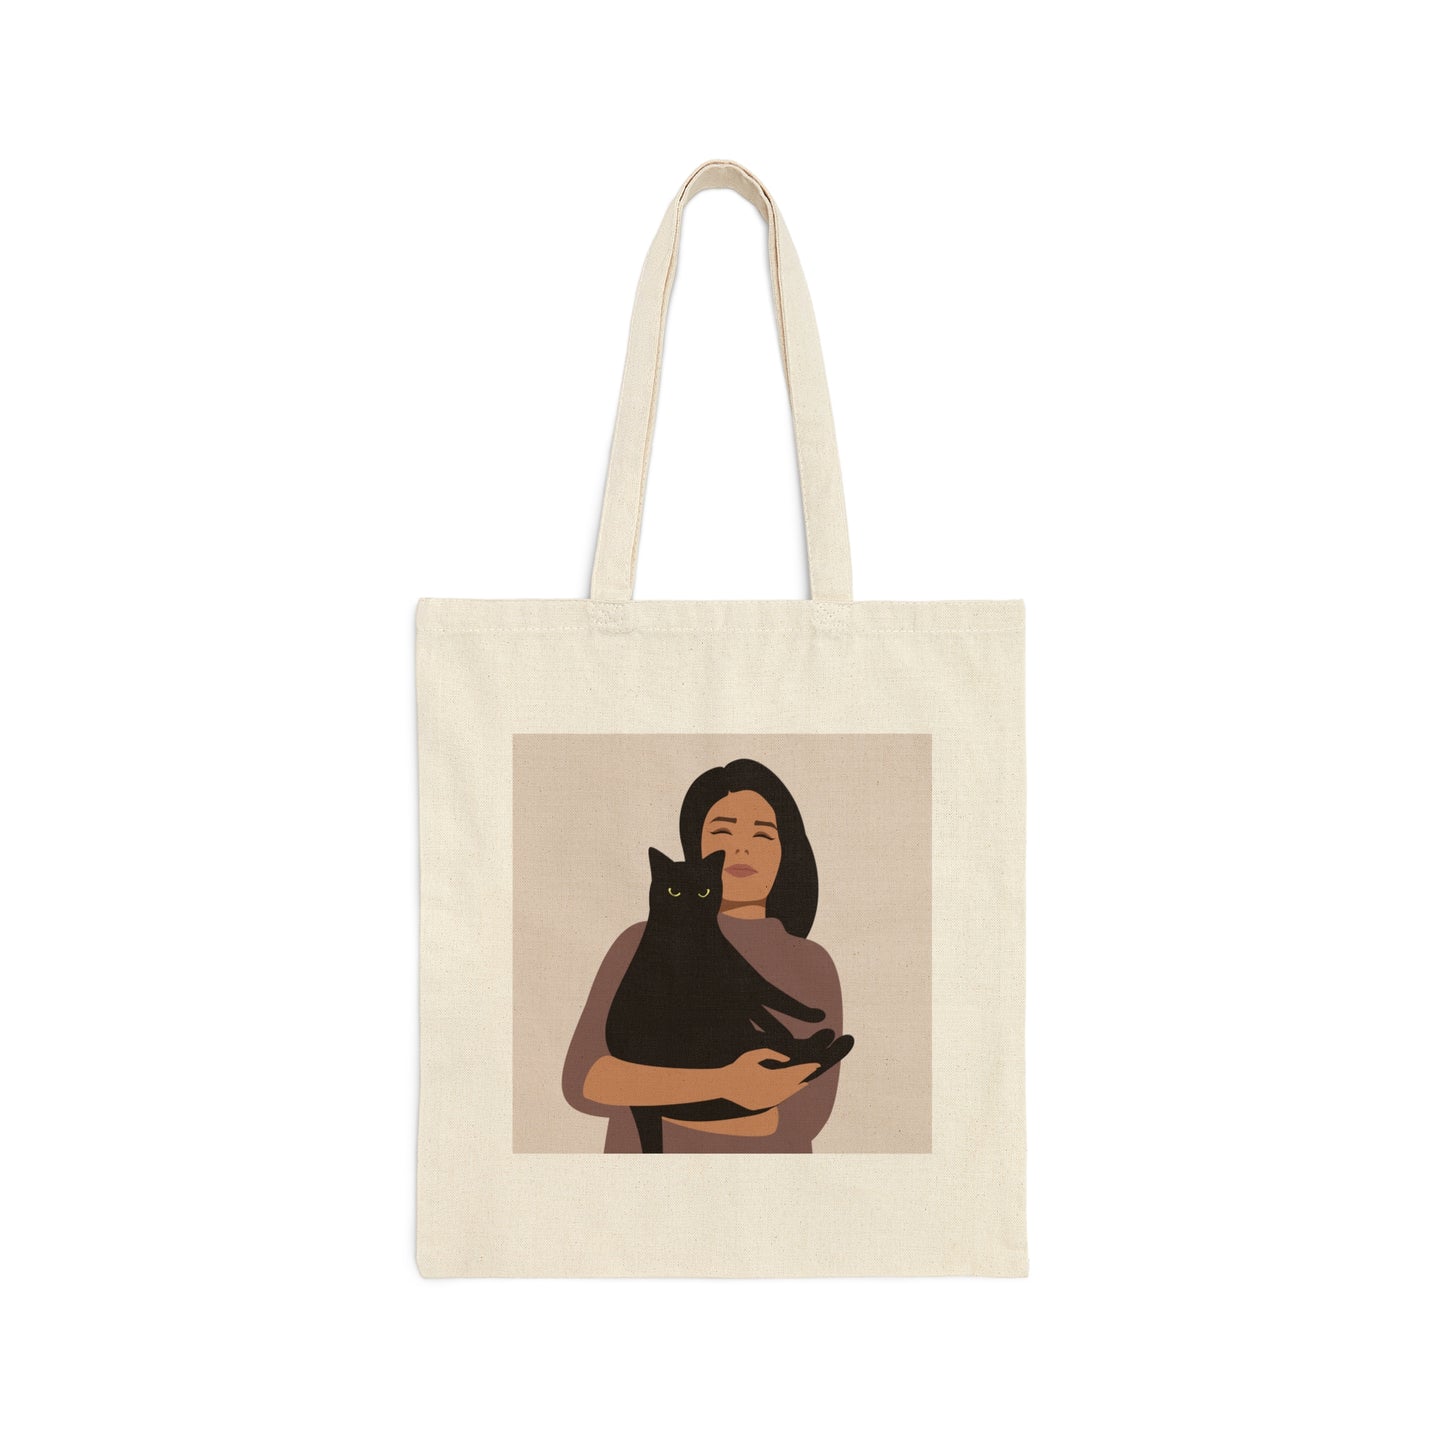 Woman with Black Cat Mininal Aesthetic Art Canvas Shopping Cotton Tote Bag